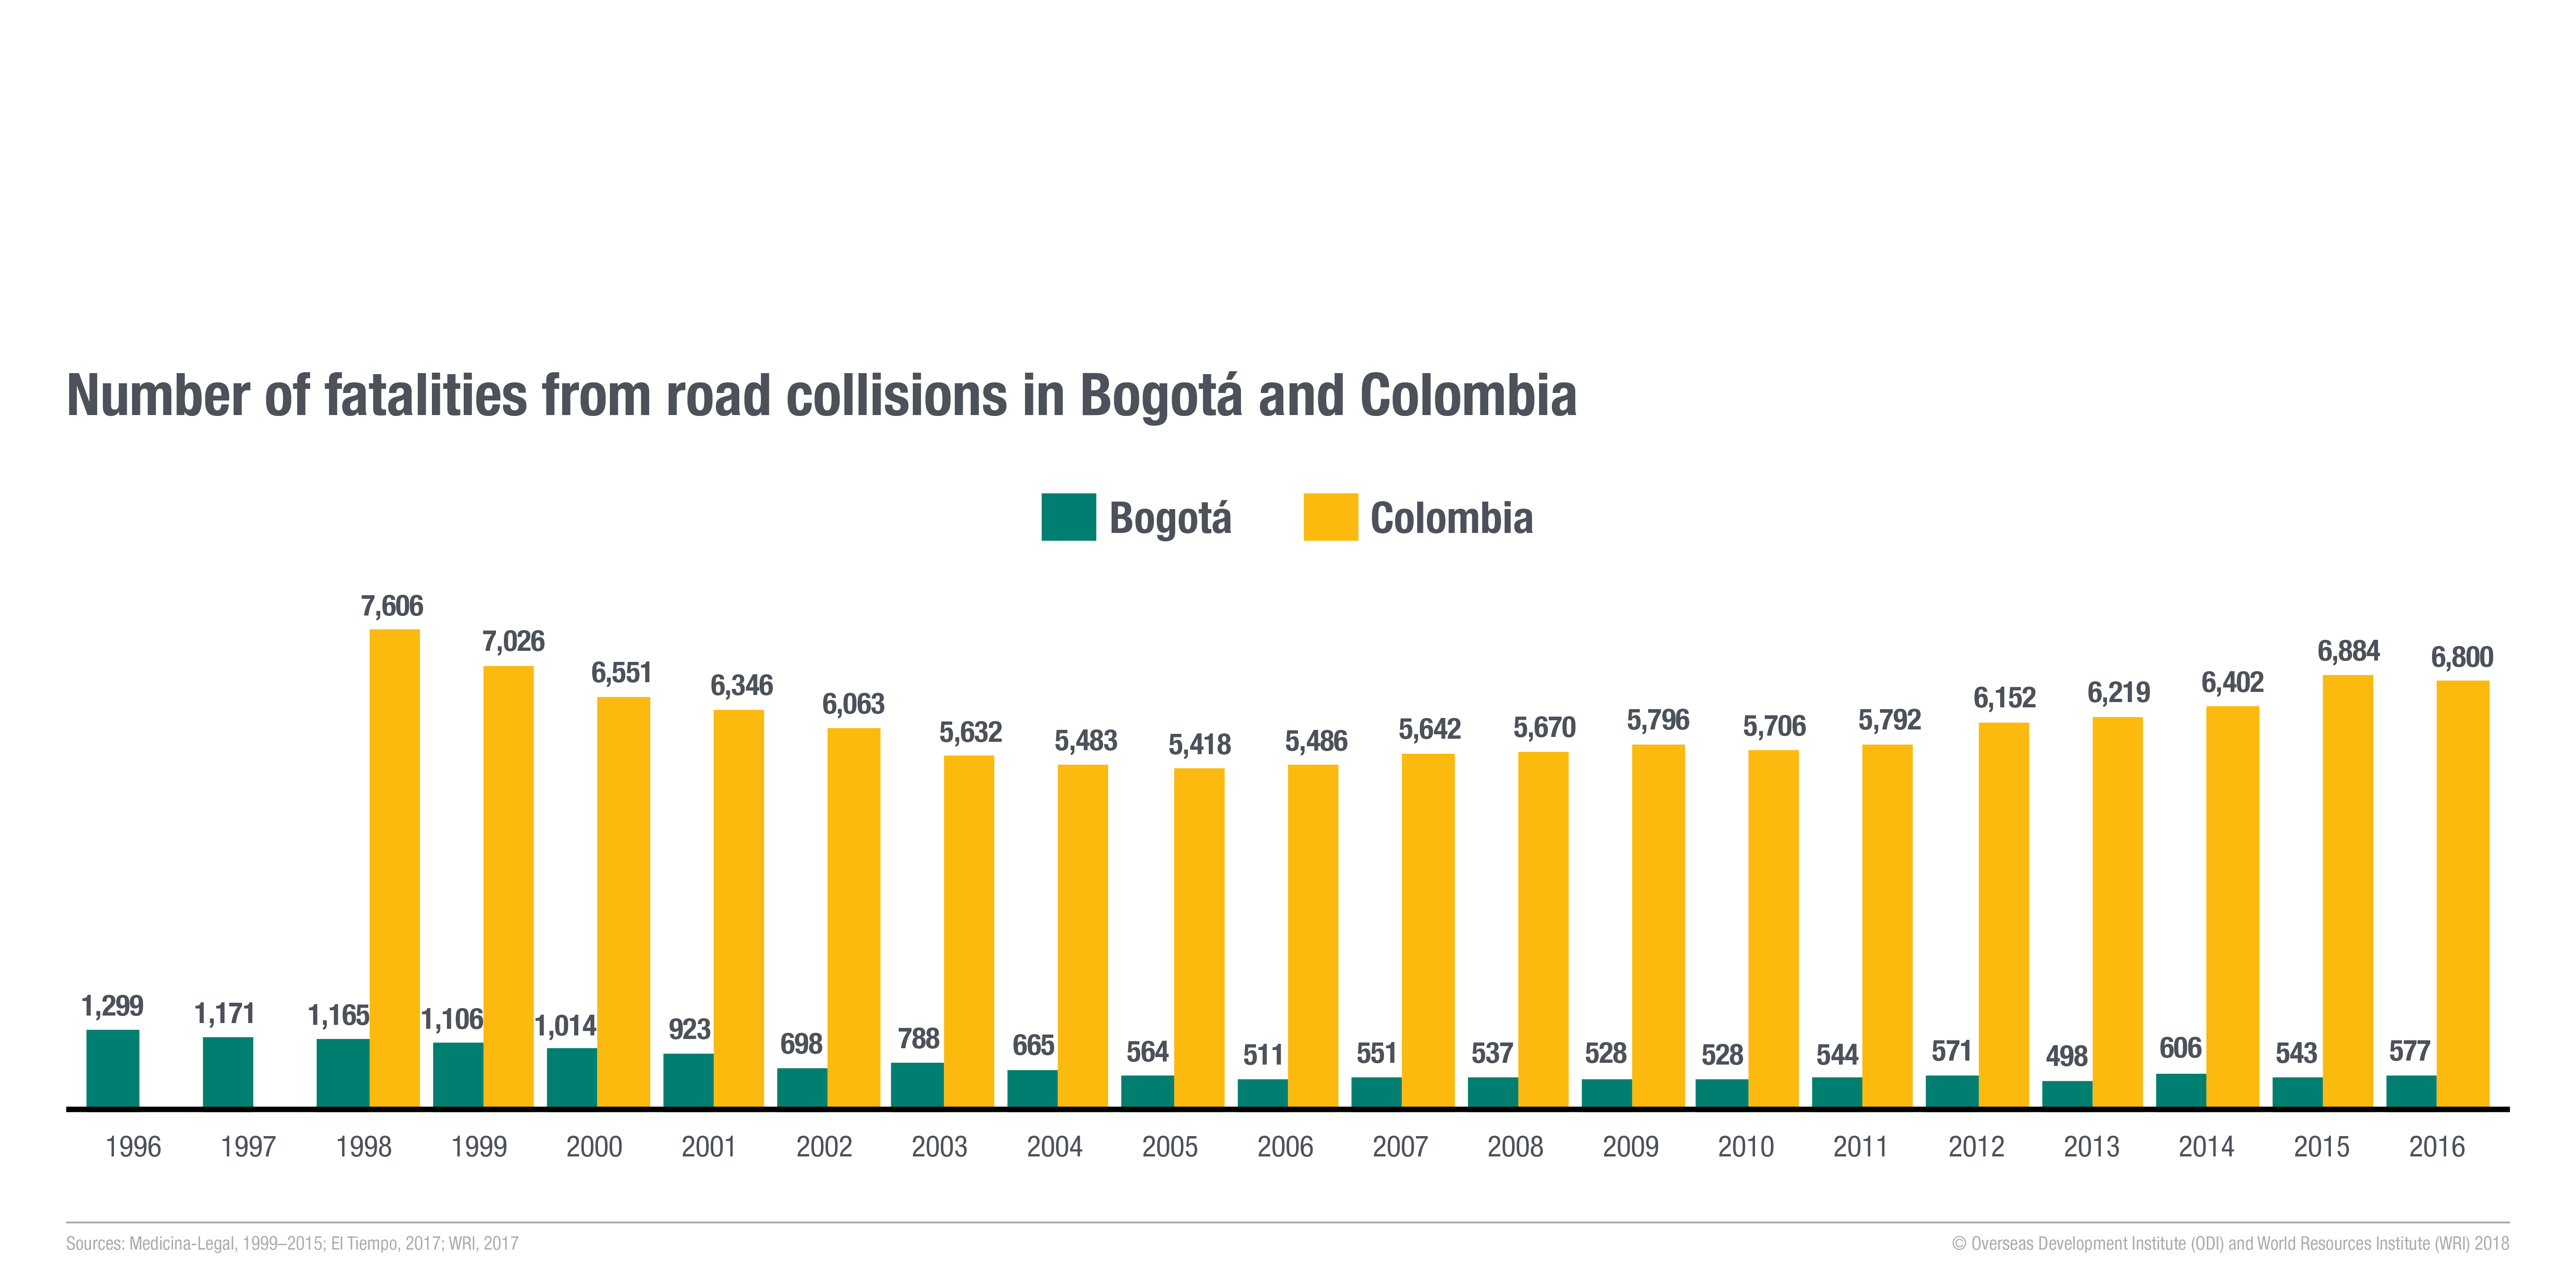 Number of fatalities from road collisions in Bogotá and Colombia. Image: ODI and WRI